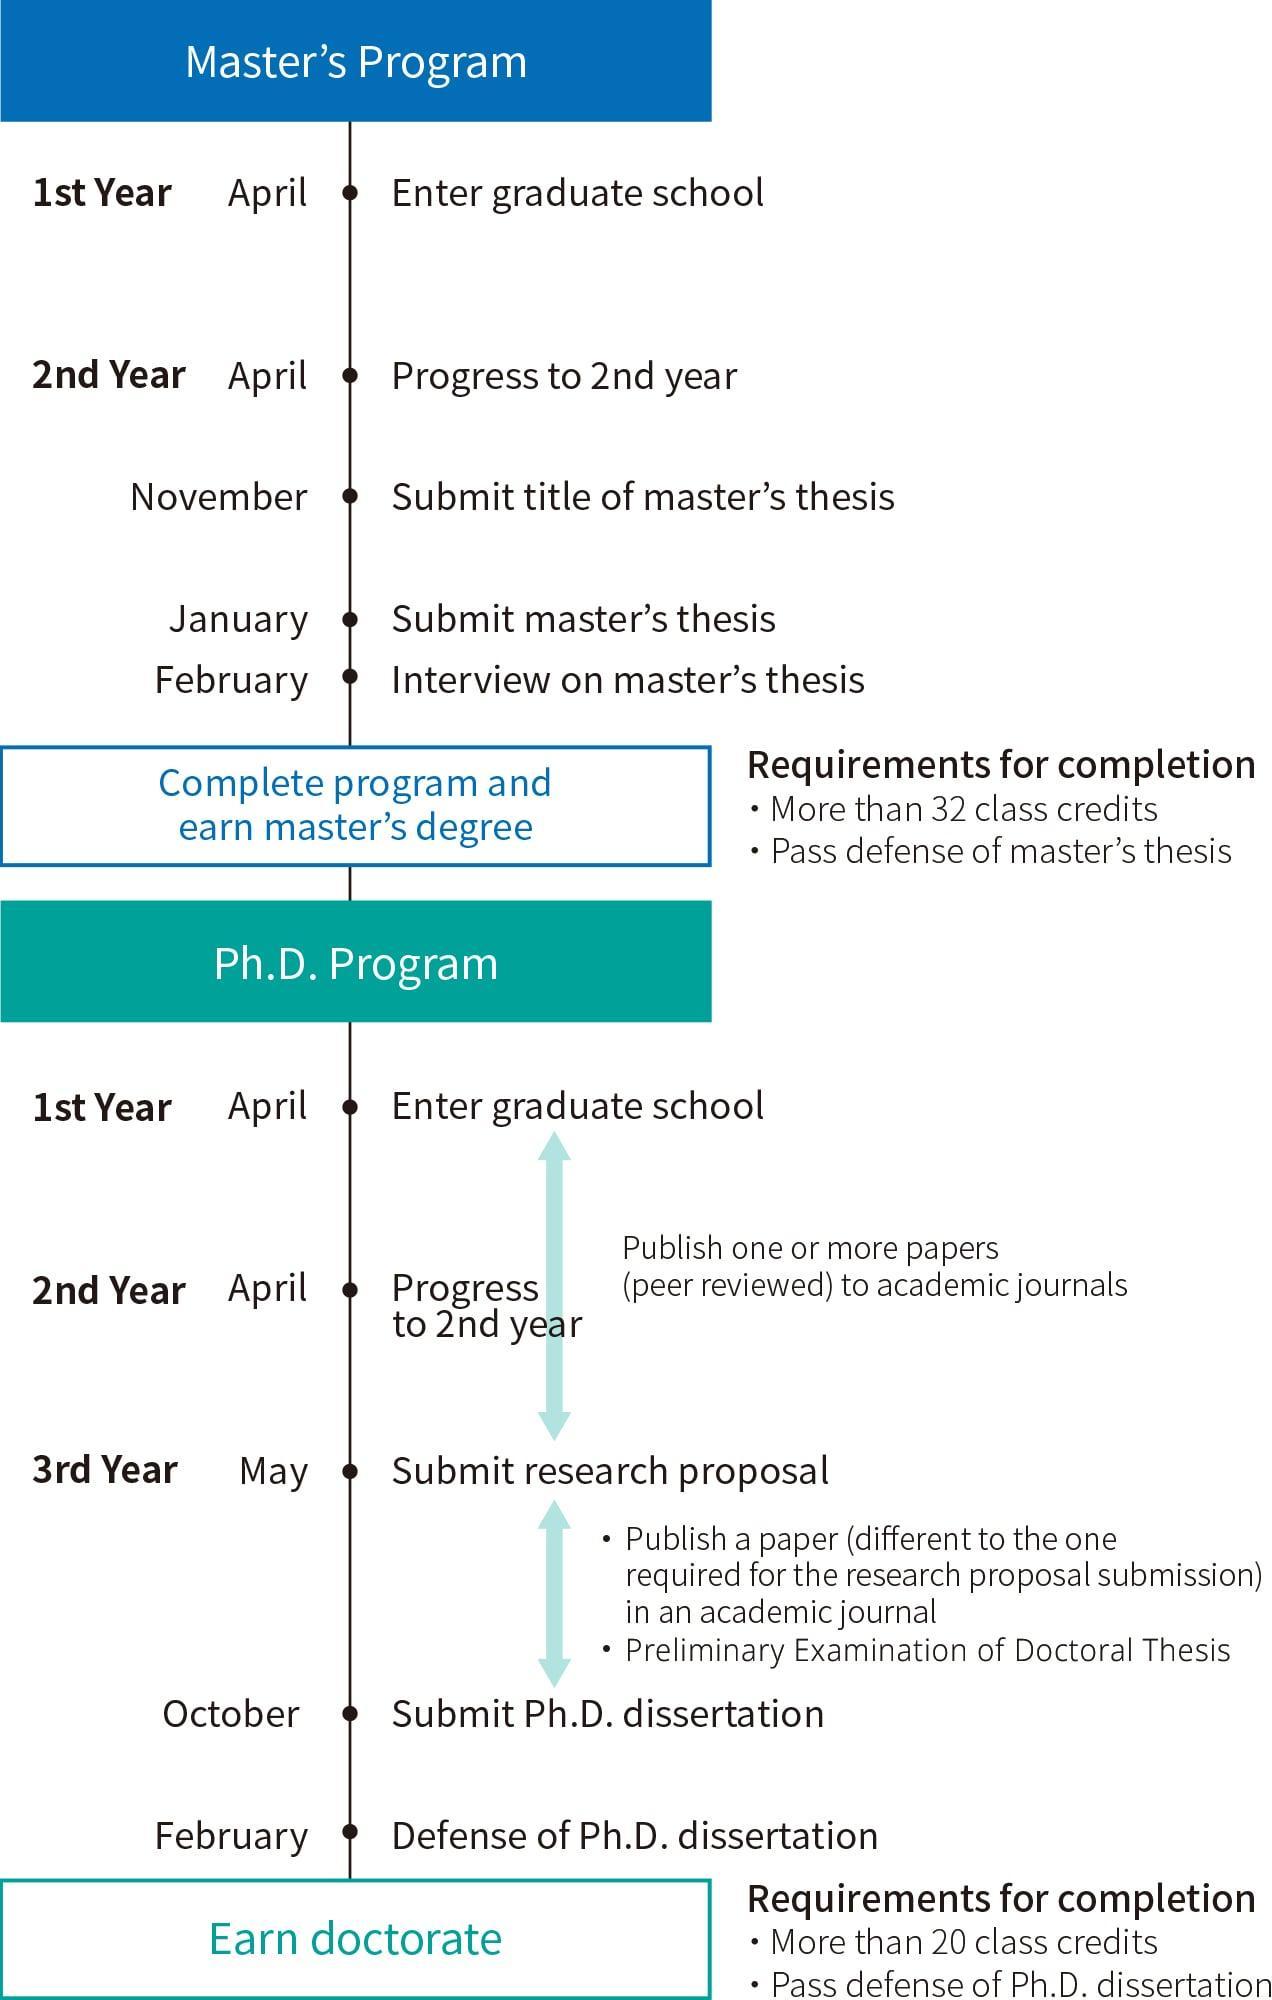 Process For Earning Your Diploma